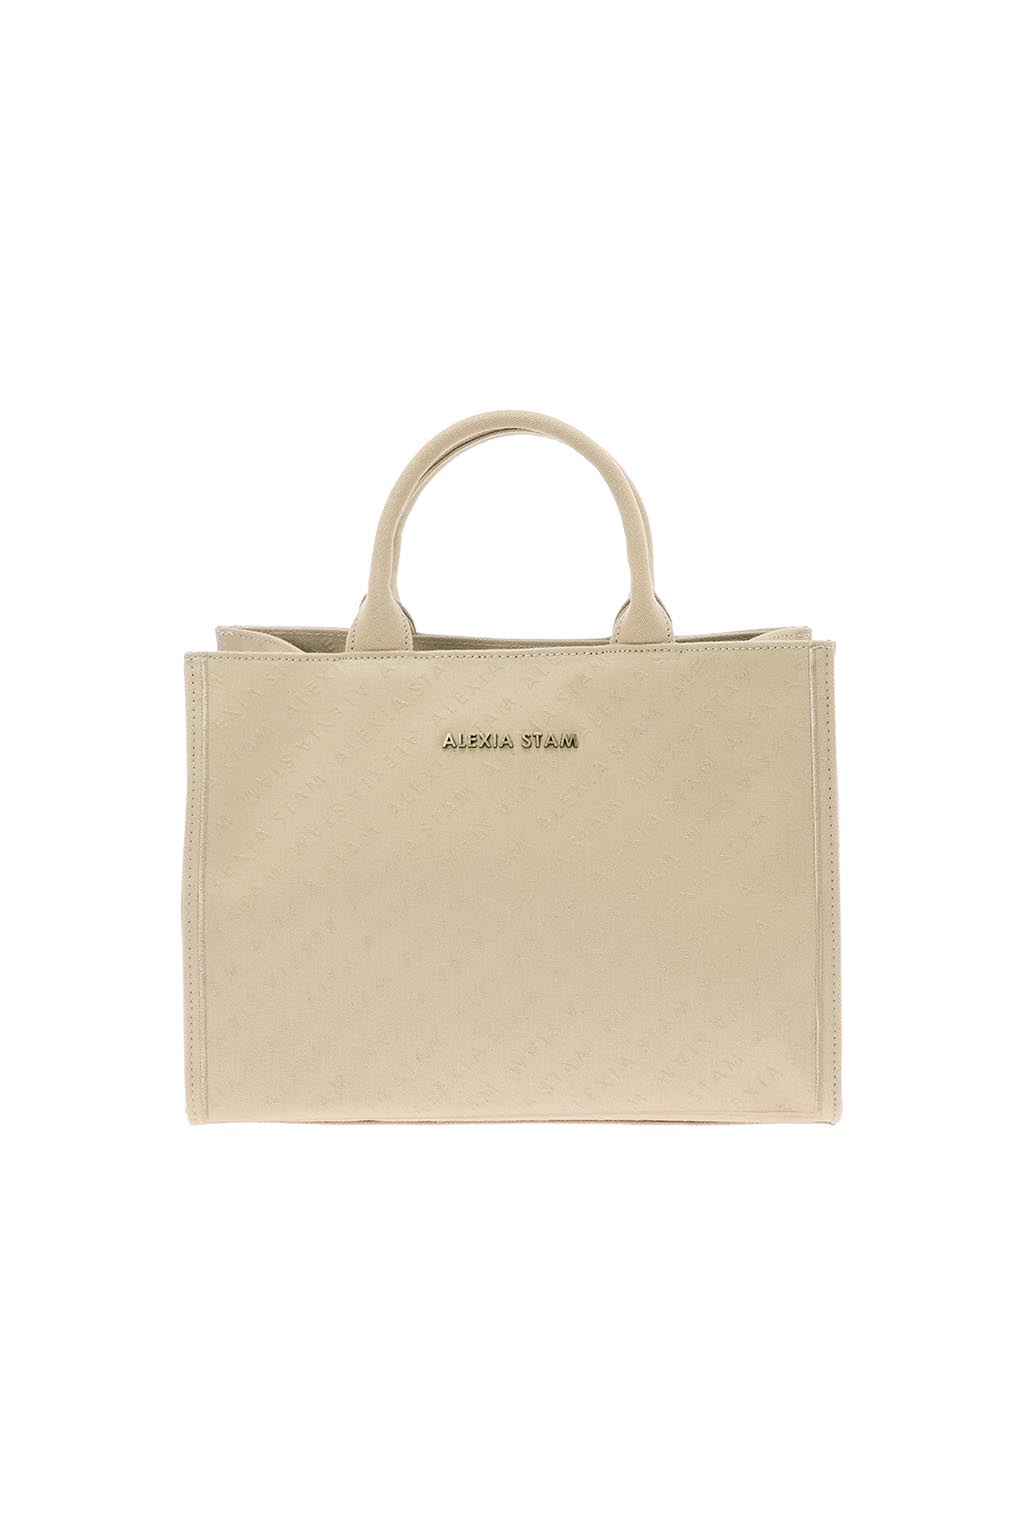 embossed-logo-square-small-tote-bag-beige-02